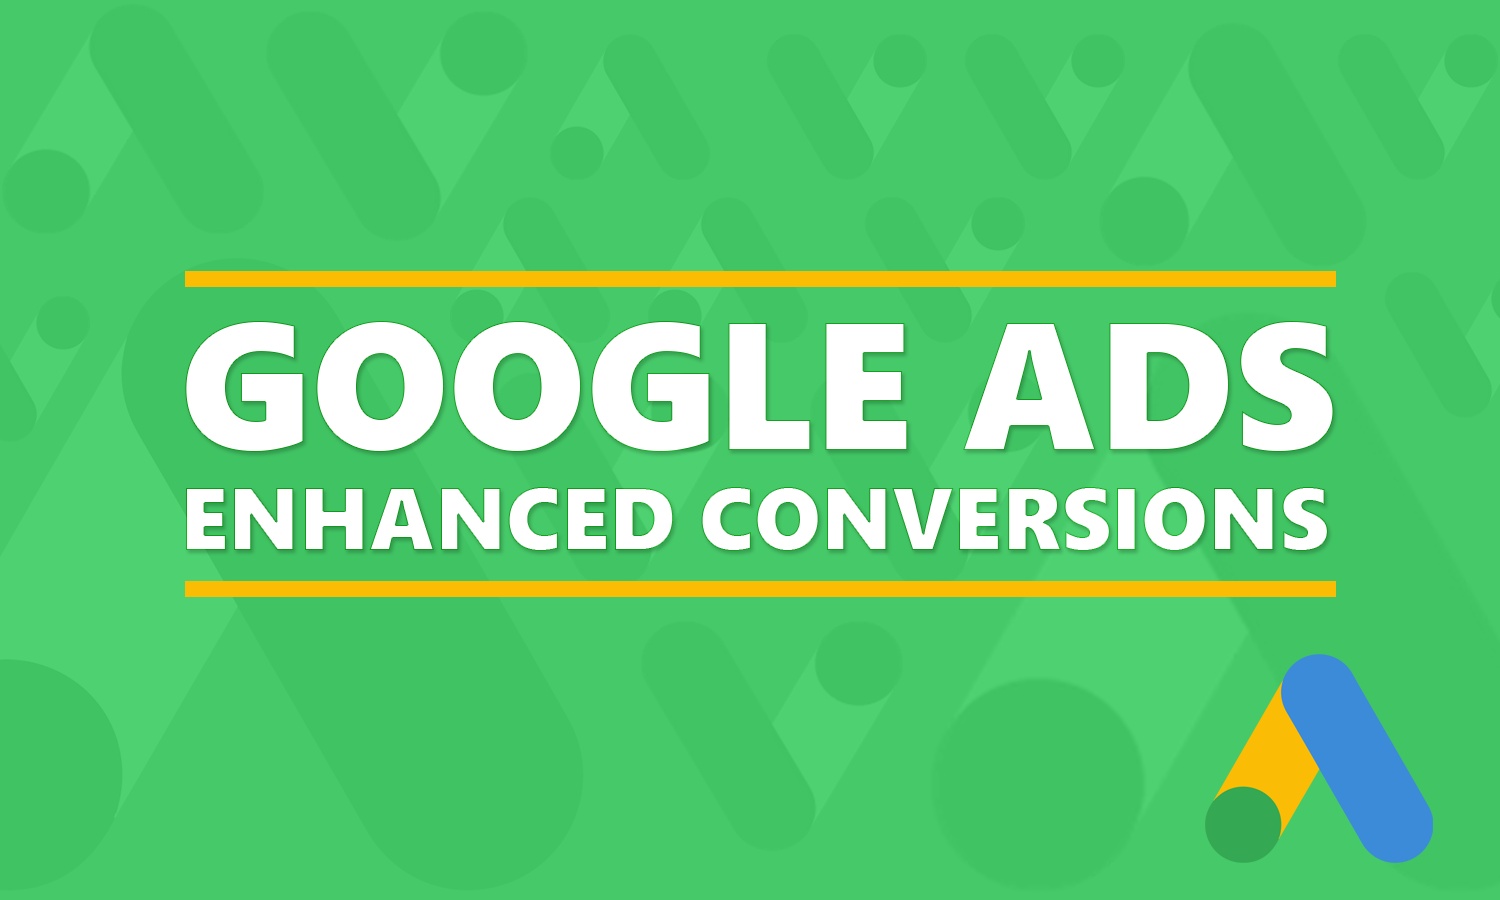 enhanced conversions in google ads